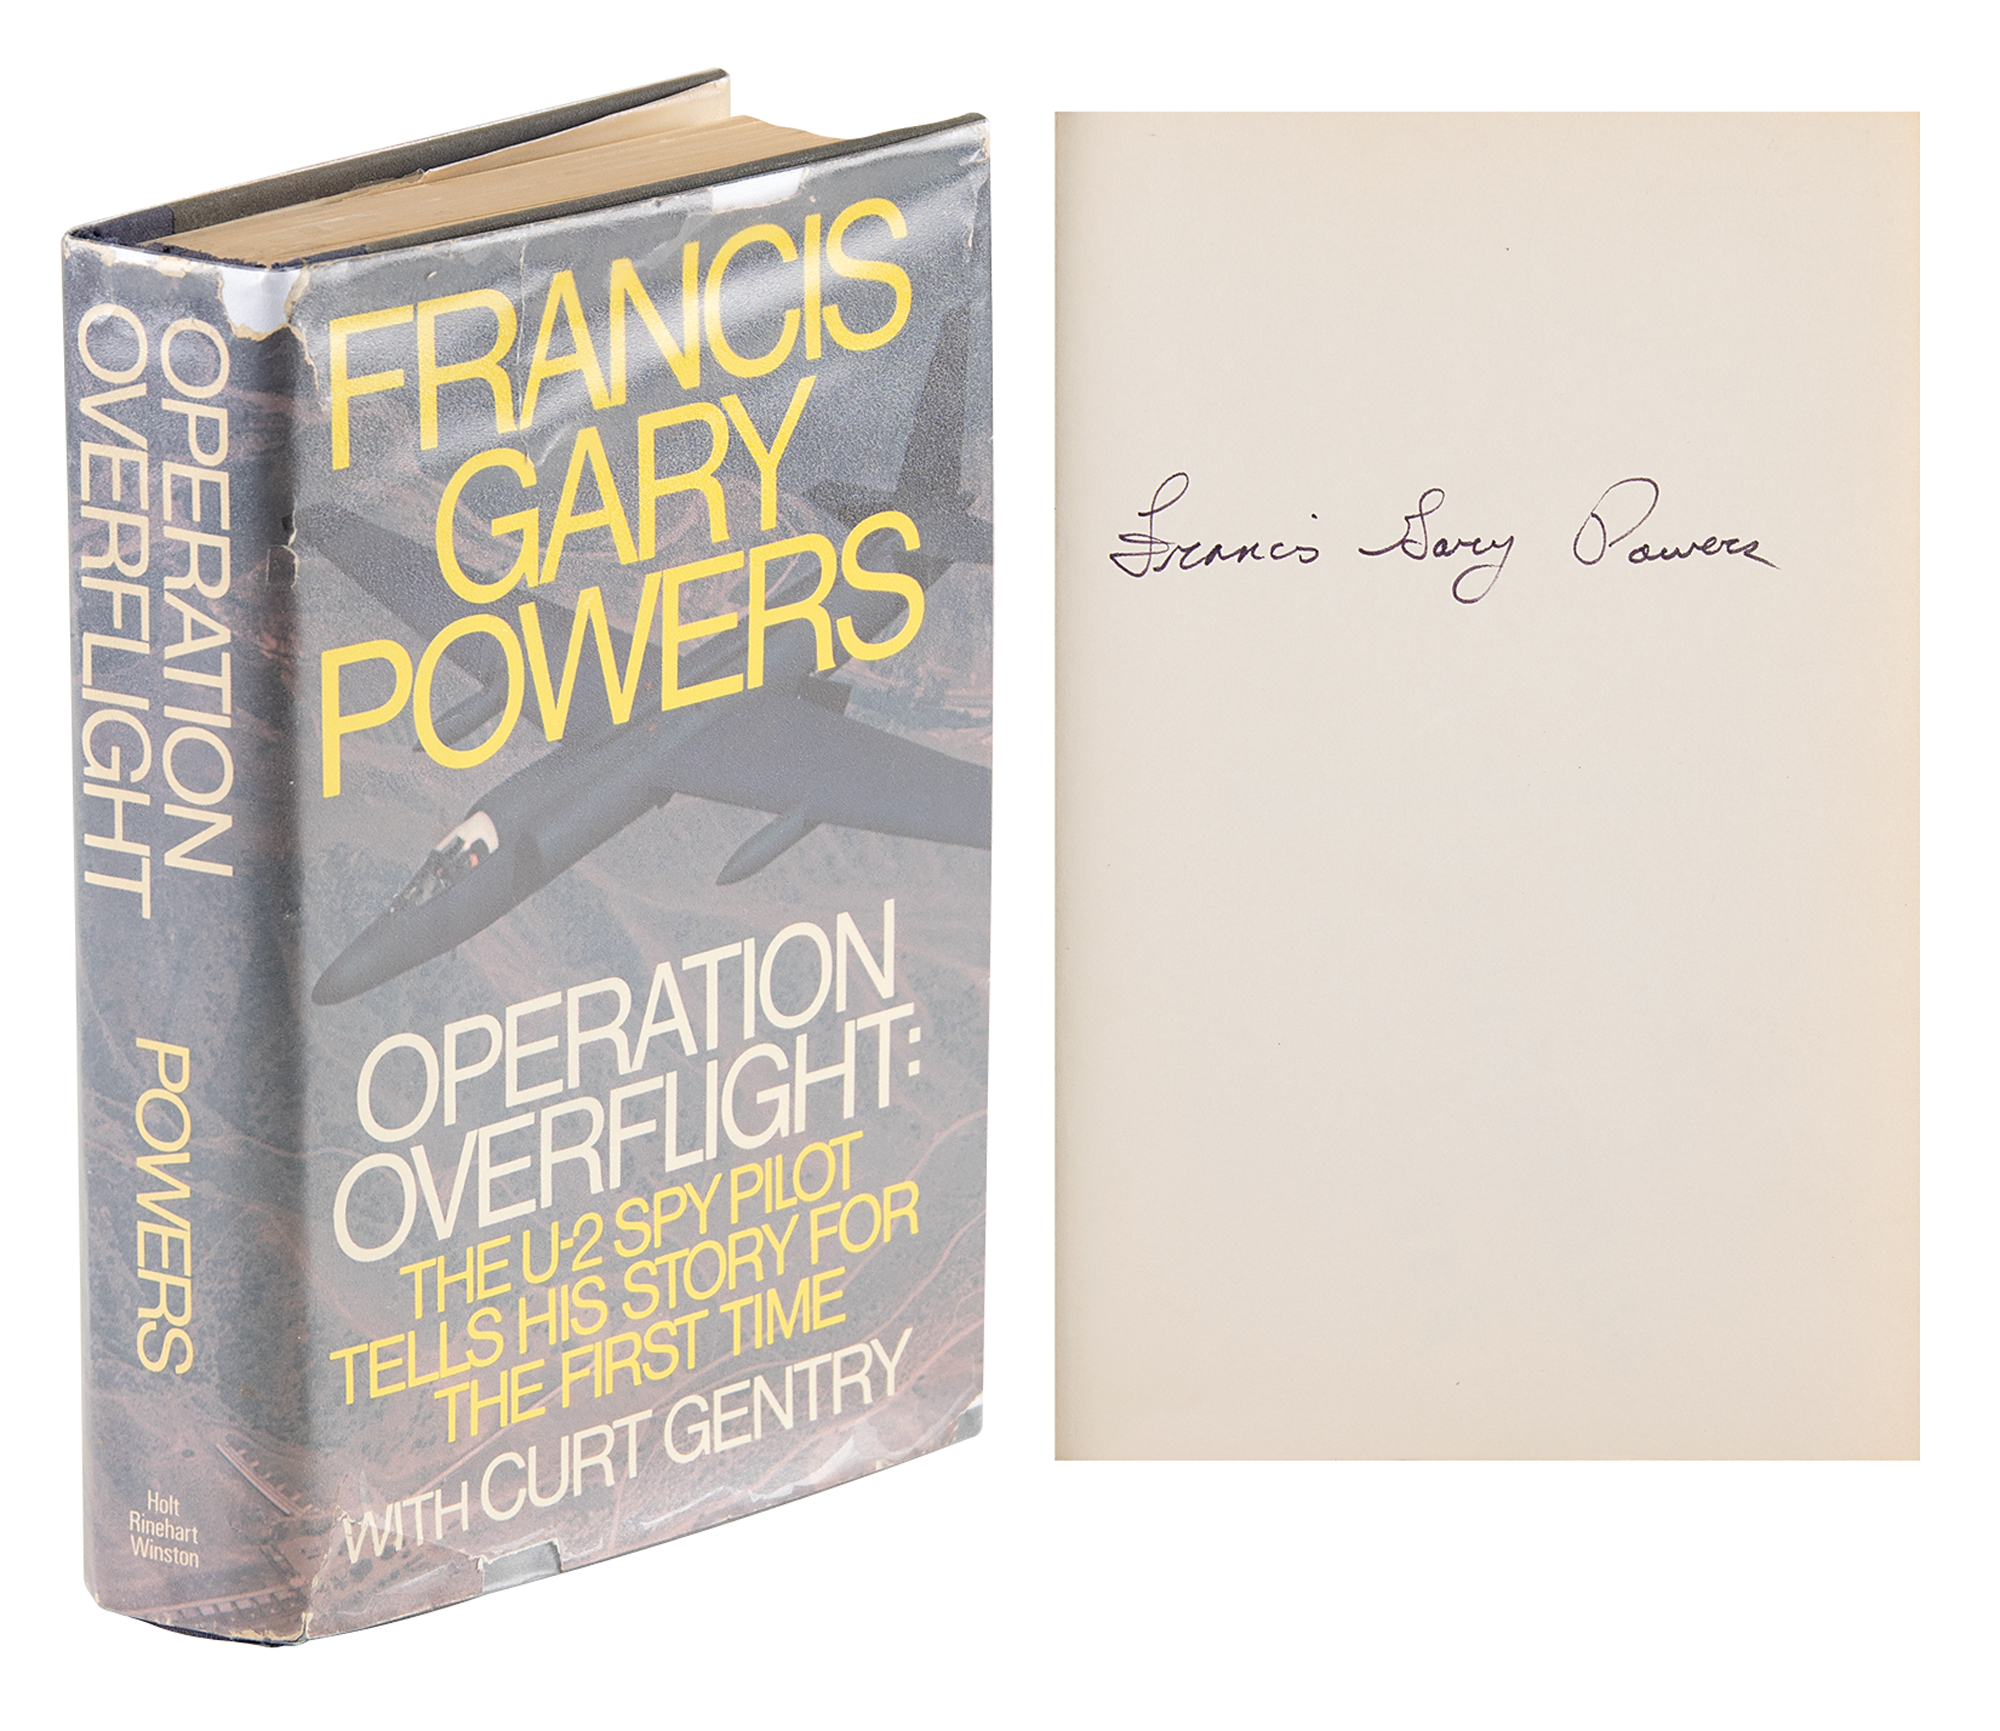 Lot #311 Francis Gary Powers Signed Book